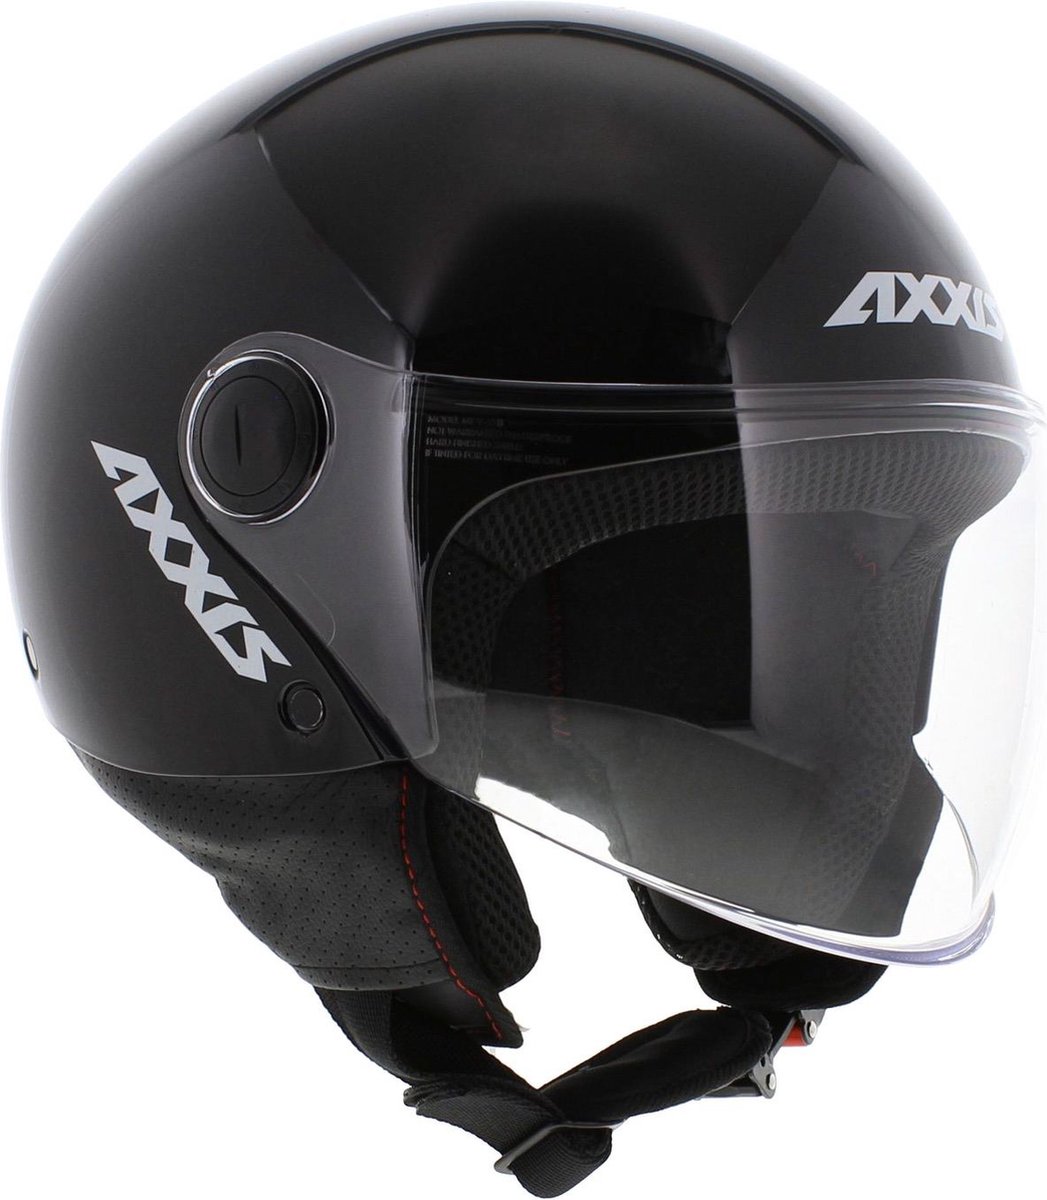 Axxis Square S helm glans zwart XL